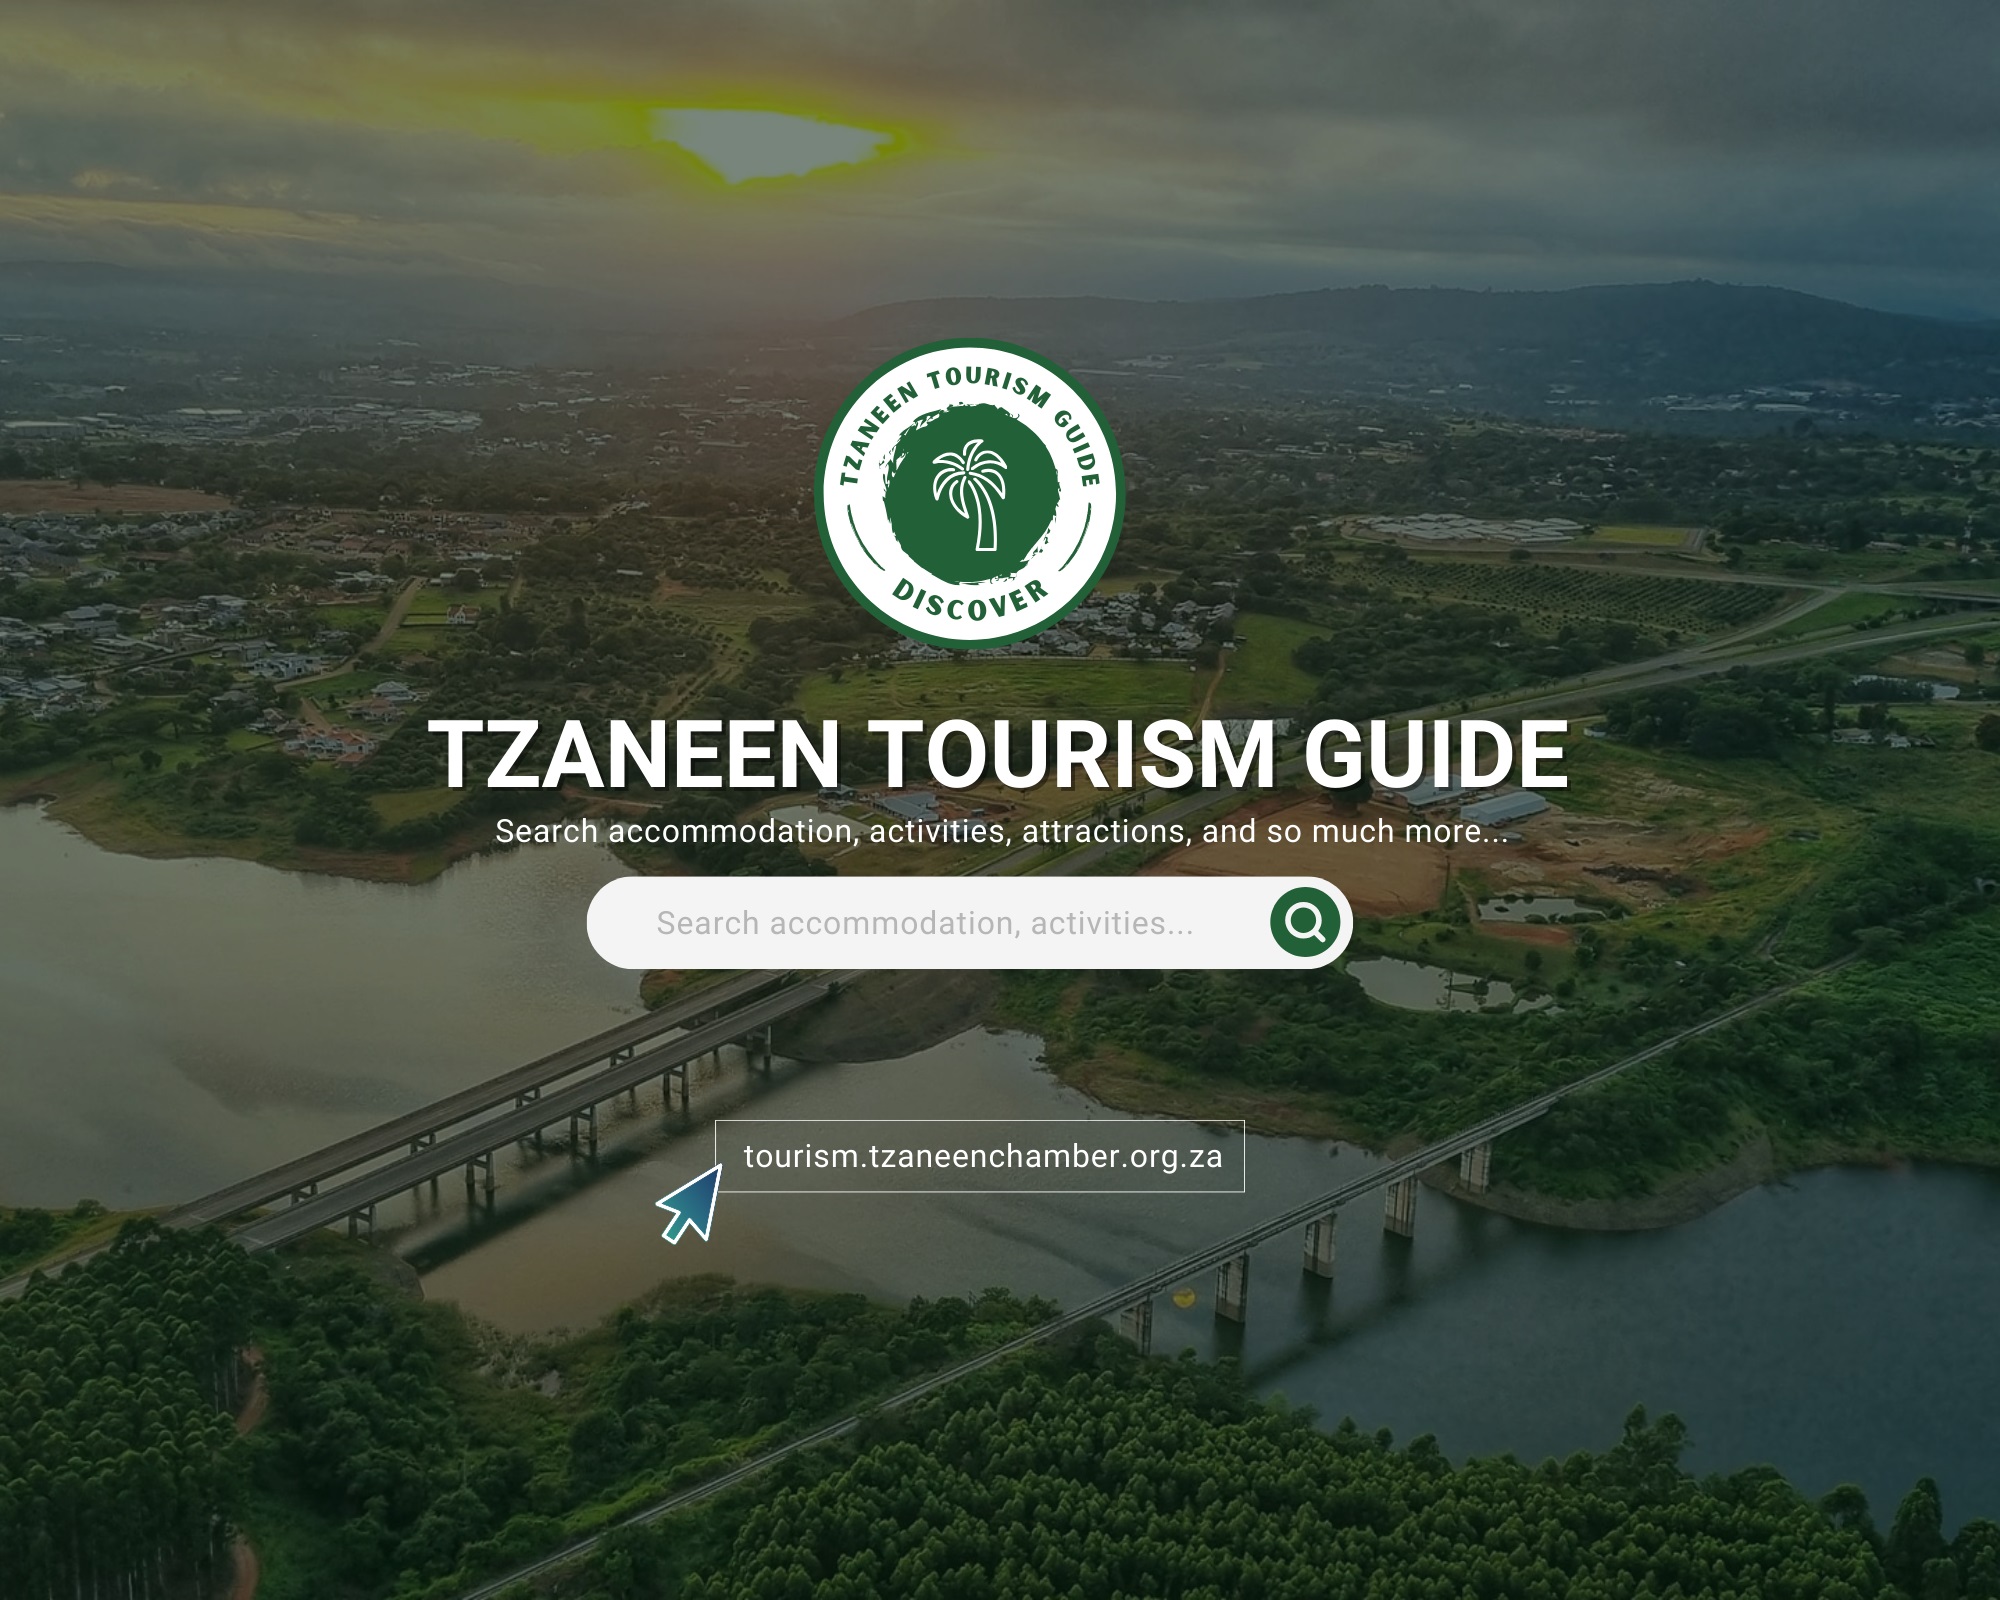 tzaneen tourism guide poster